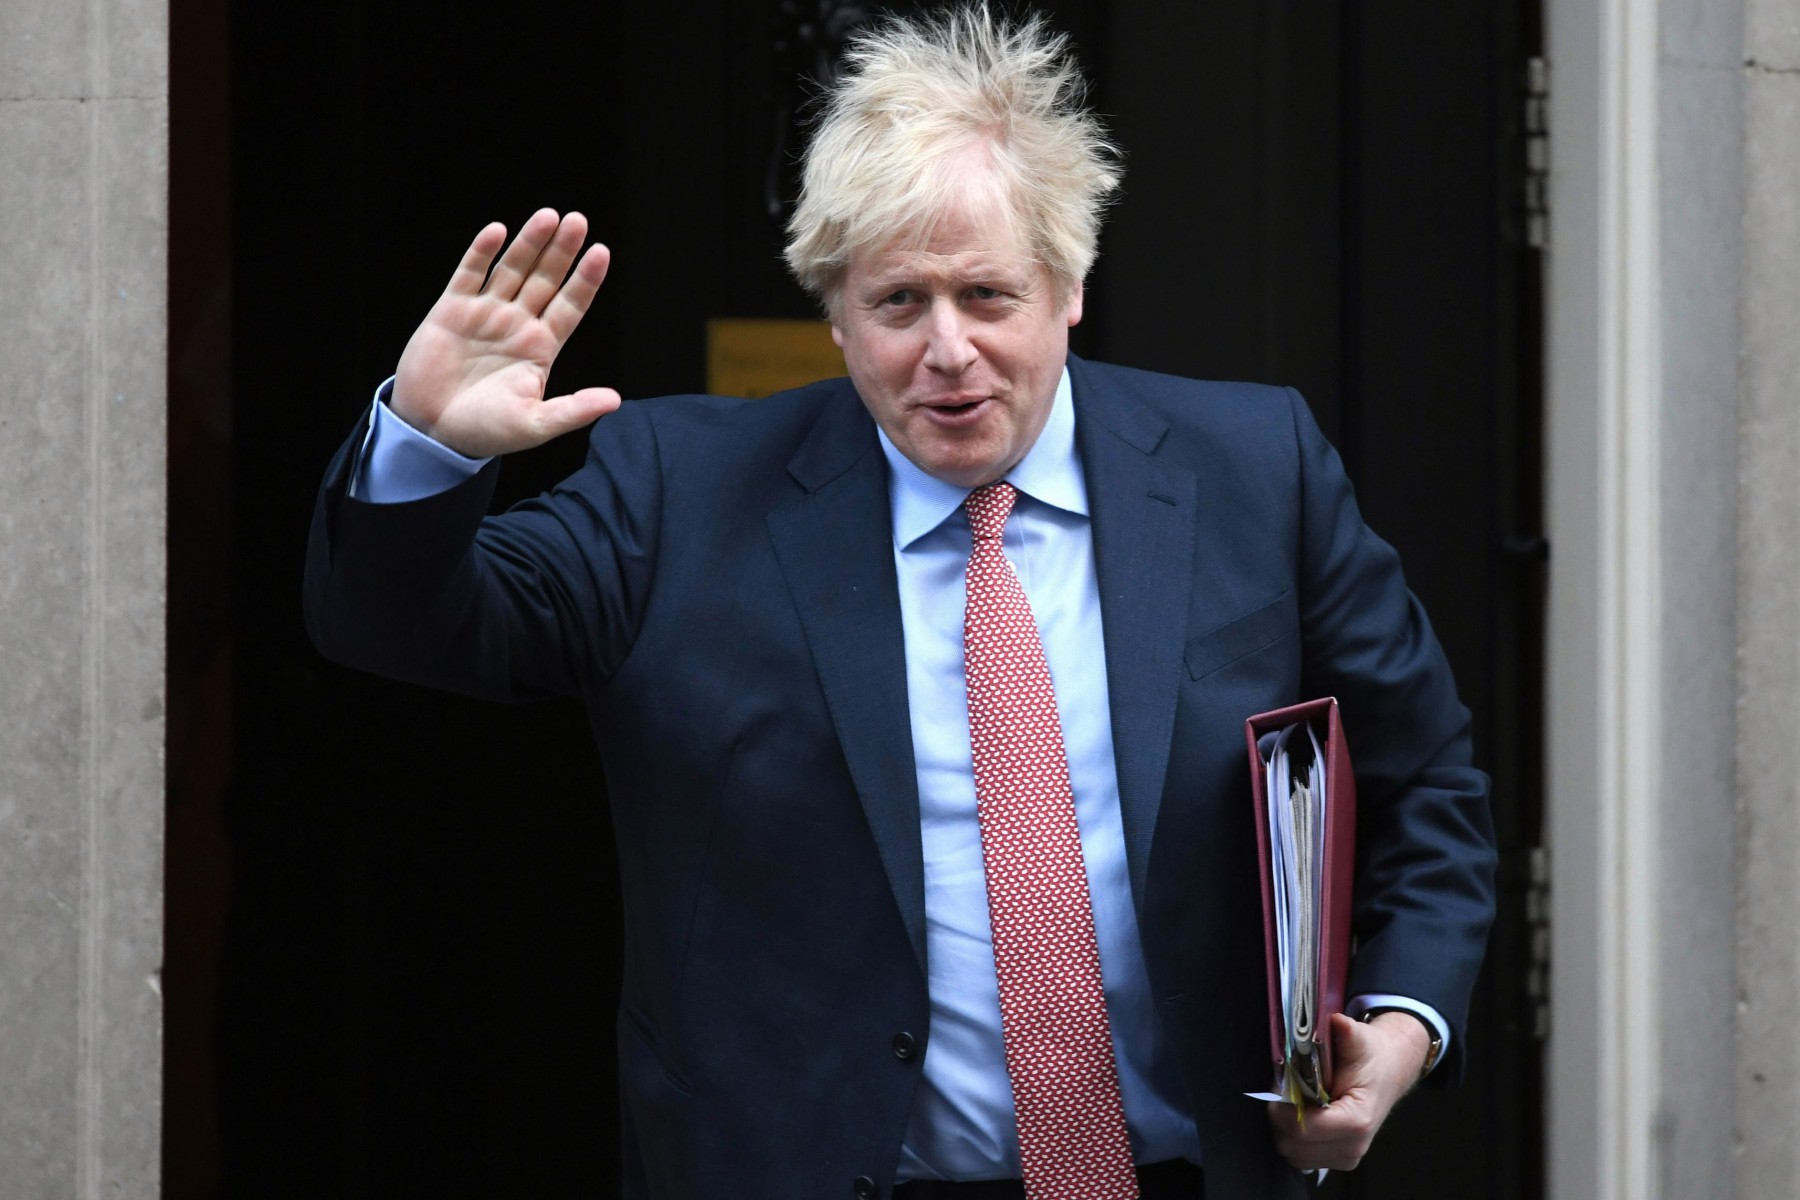 Prime Minister Boris Johnson leaves 10 Downing Street, London, for the House of Commons for Prime Minister's Questions on January 29